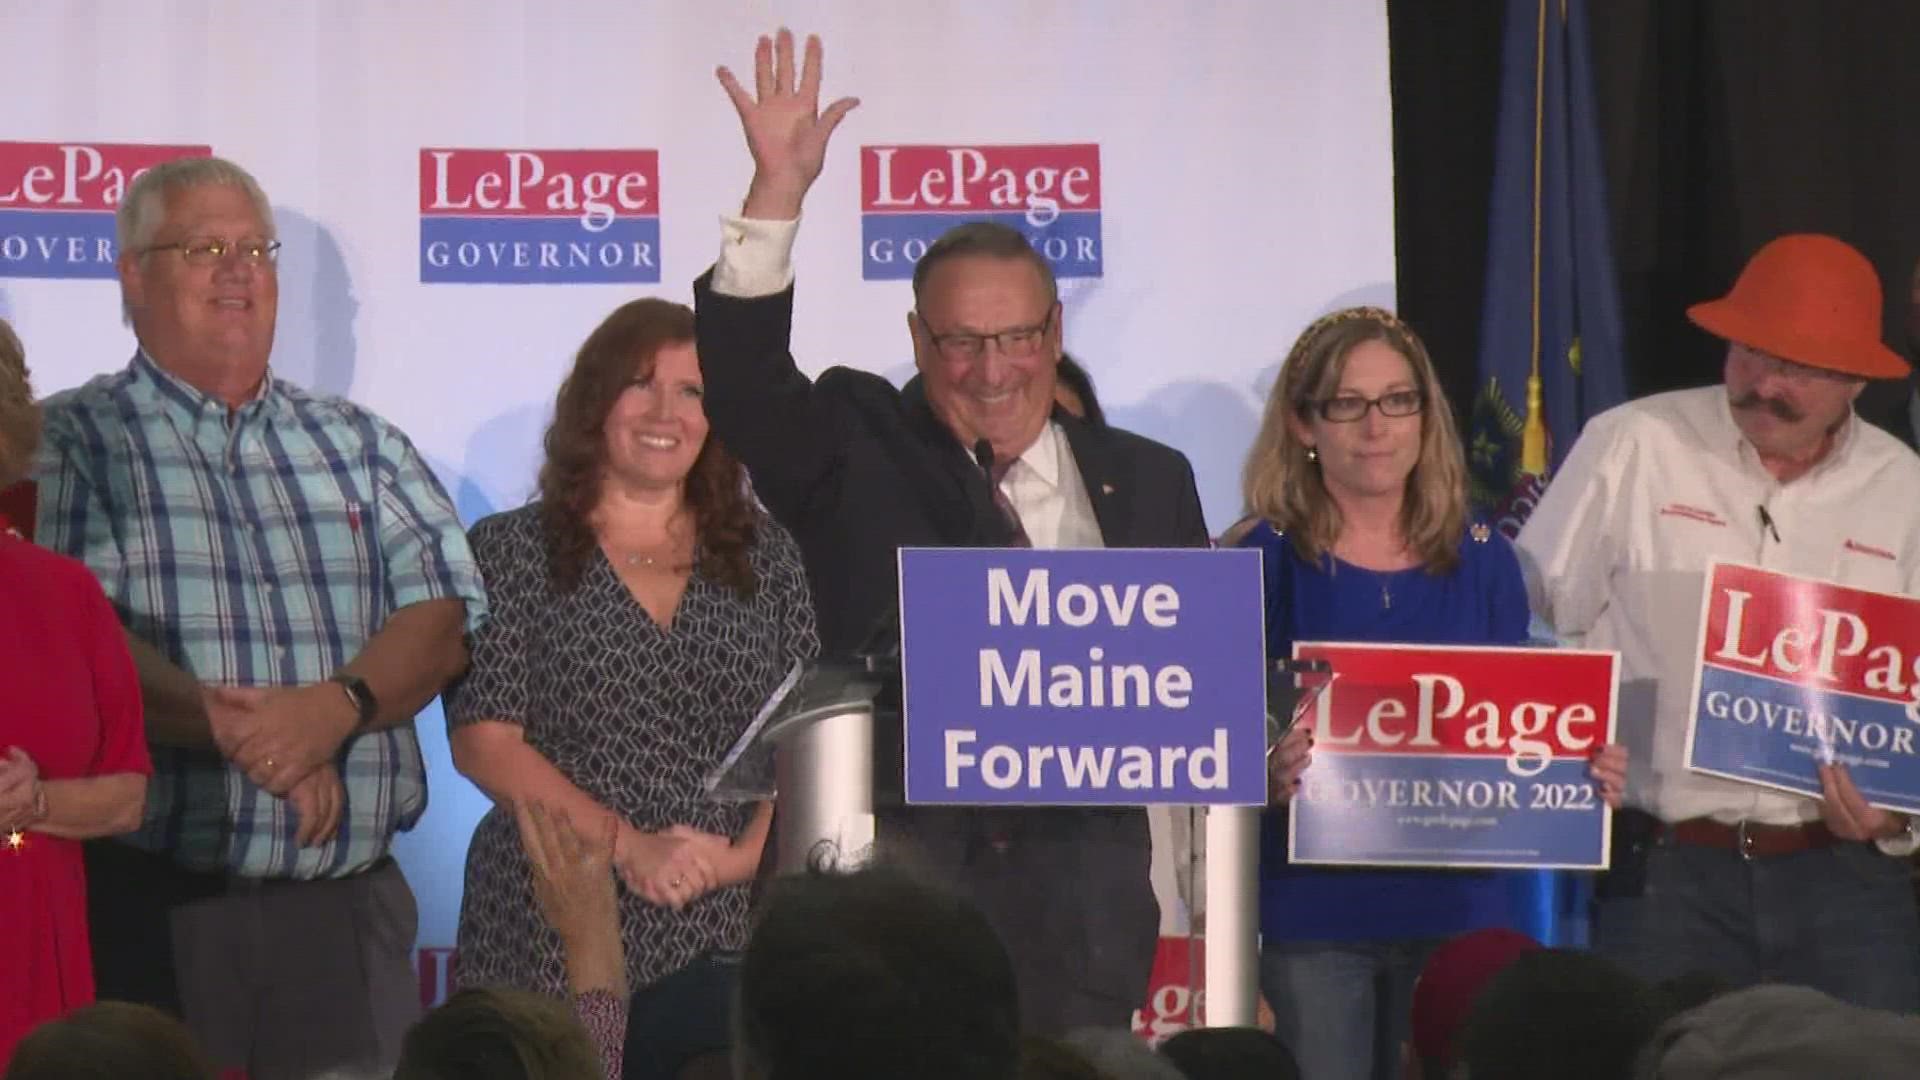 Former Maine Governor Paul LePage held a rally in Augusta on Wednesday to officially launch his 2022 gubernatorial election campaign.